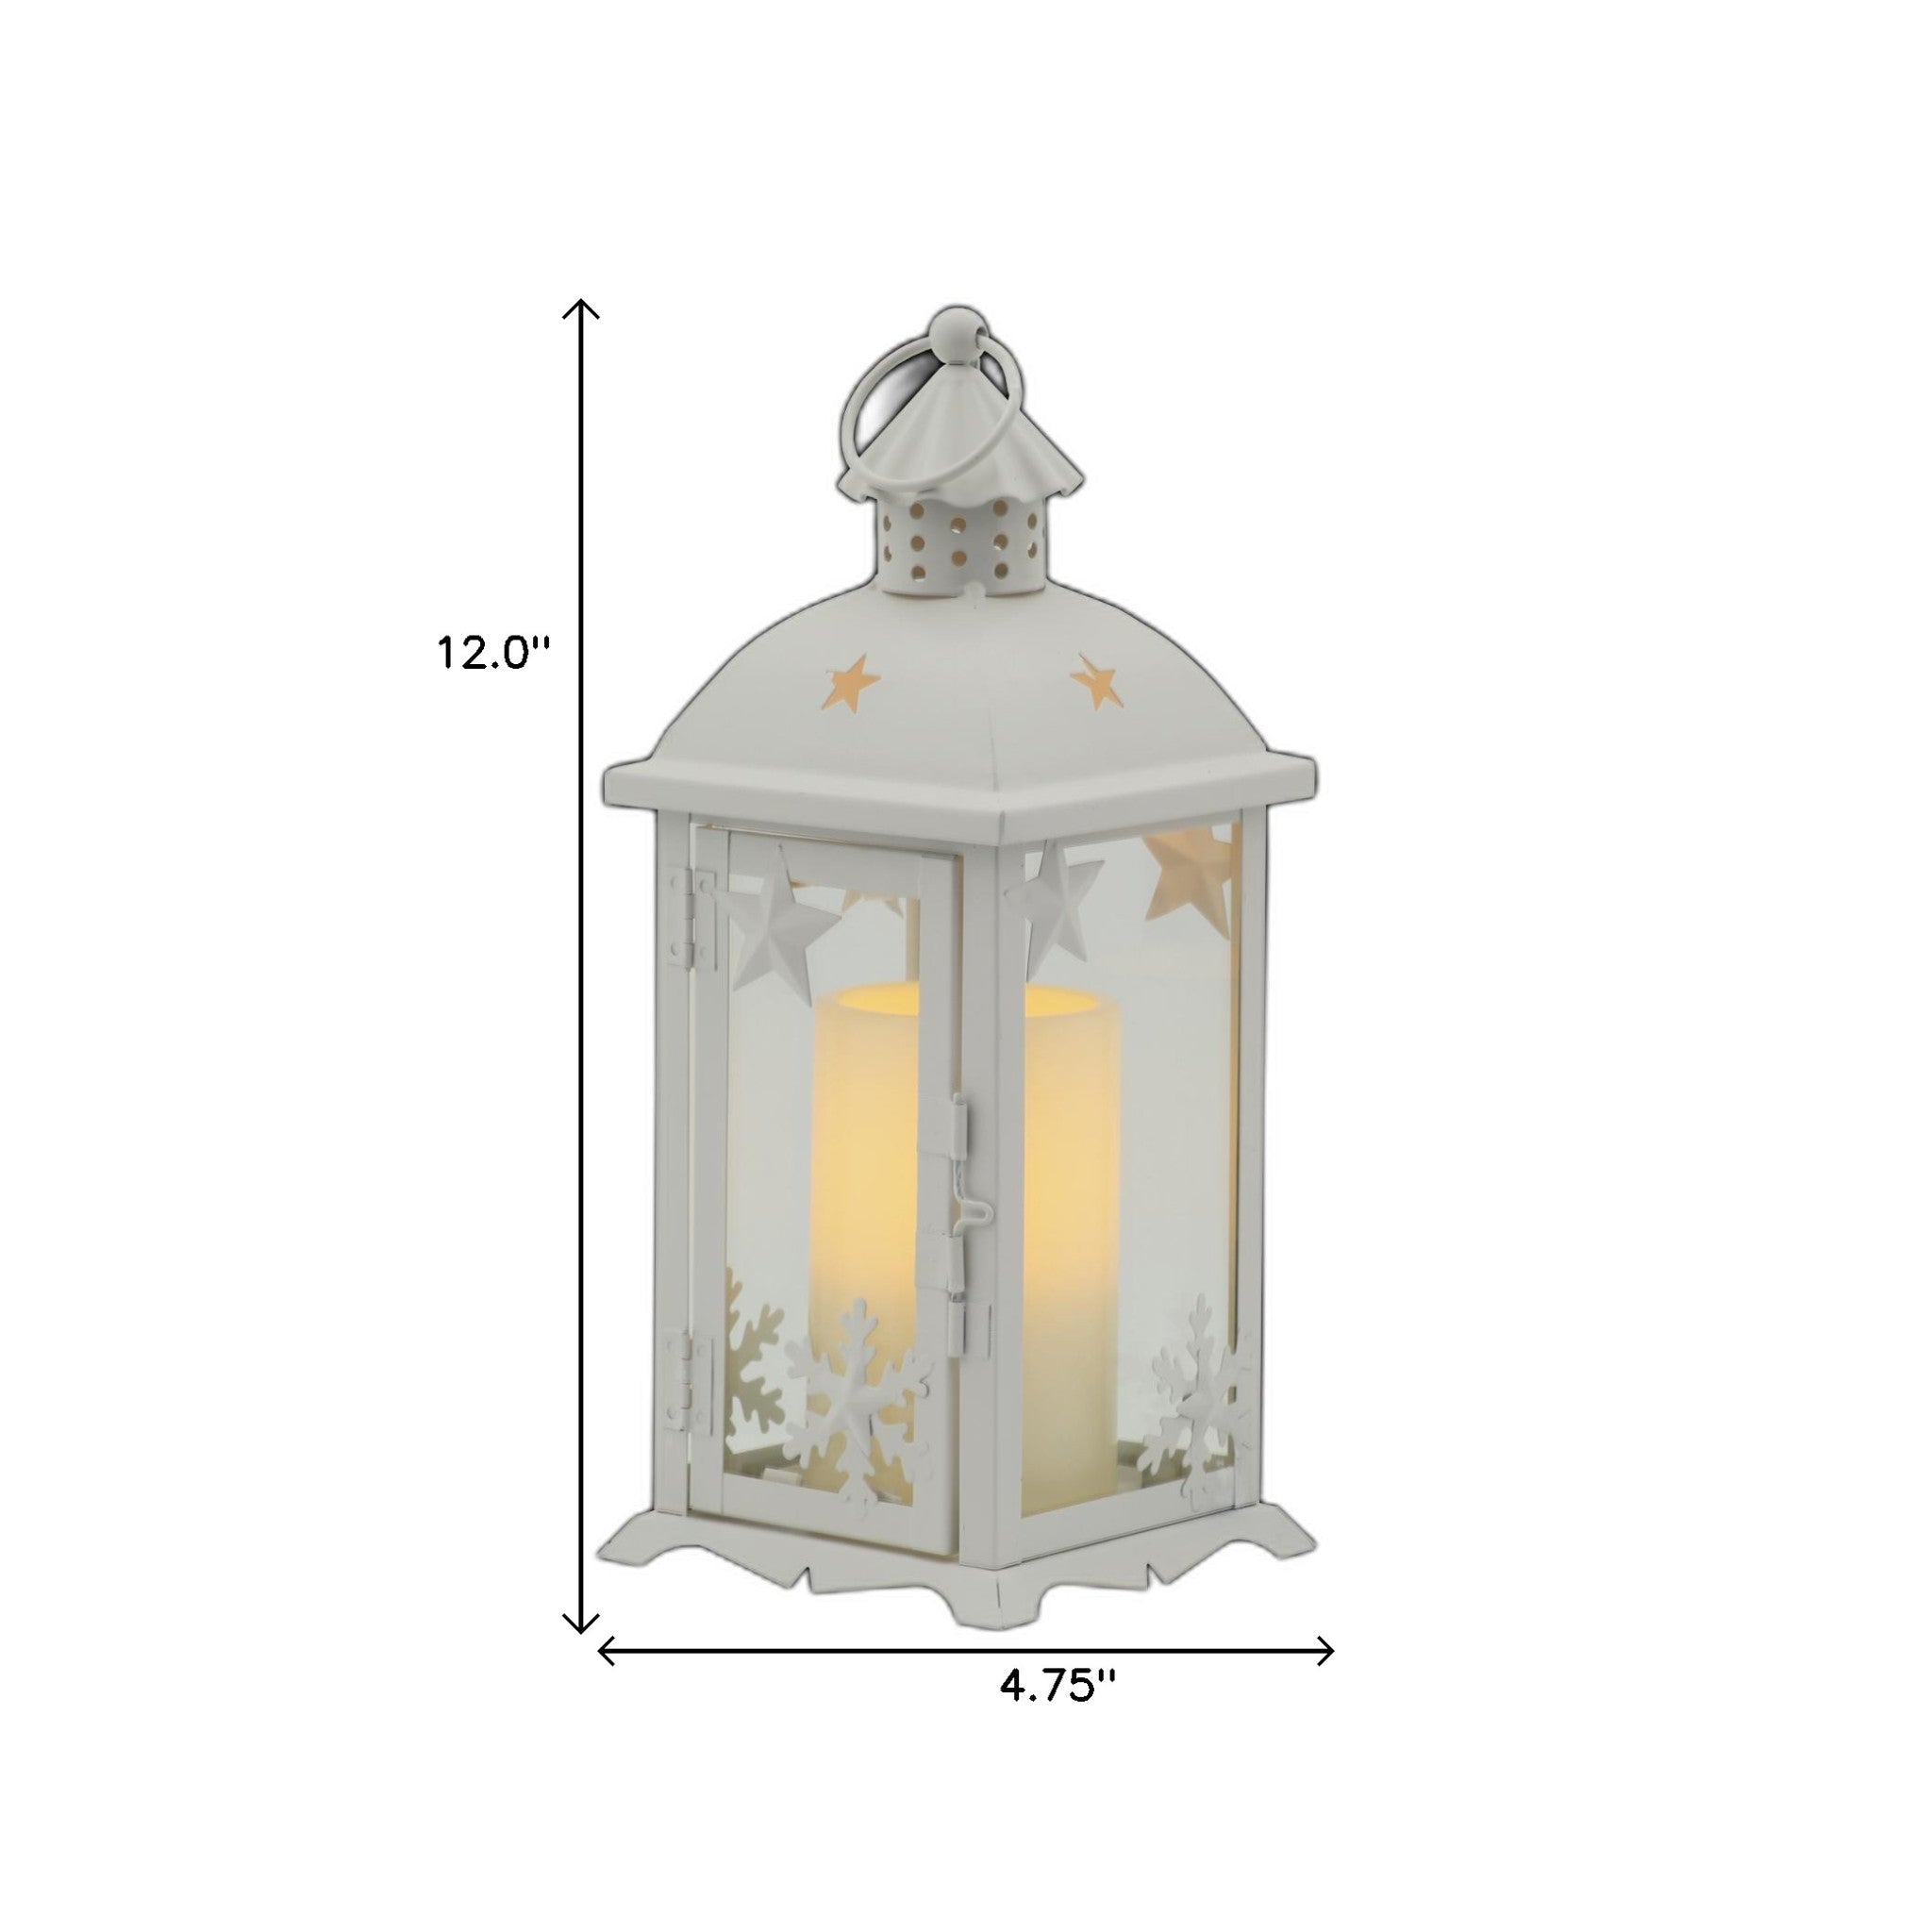 12" White Metal Tabletop Lantern Candle Holder With Candle